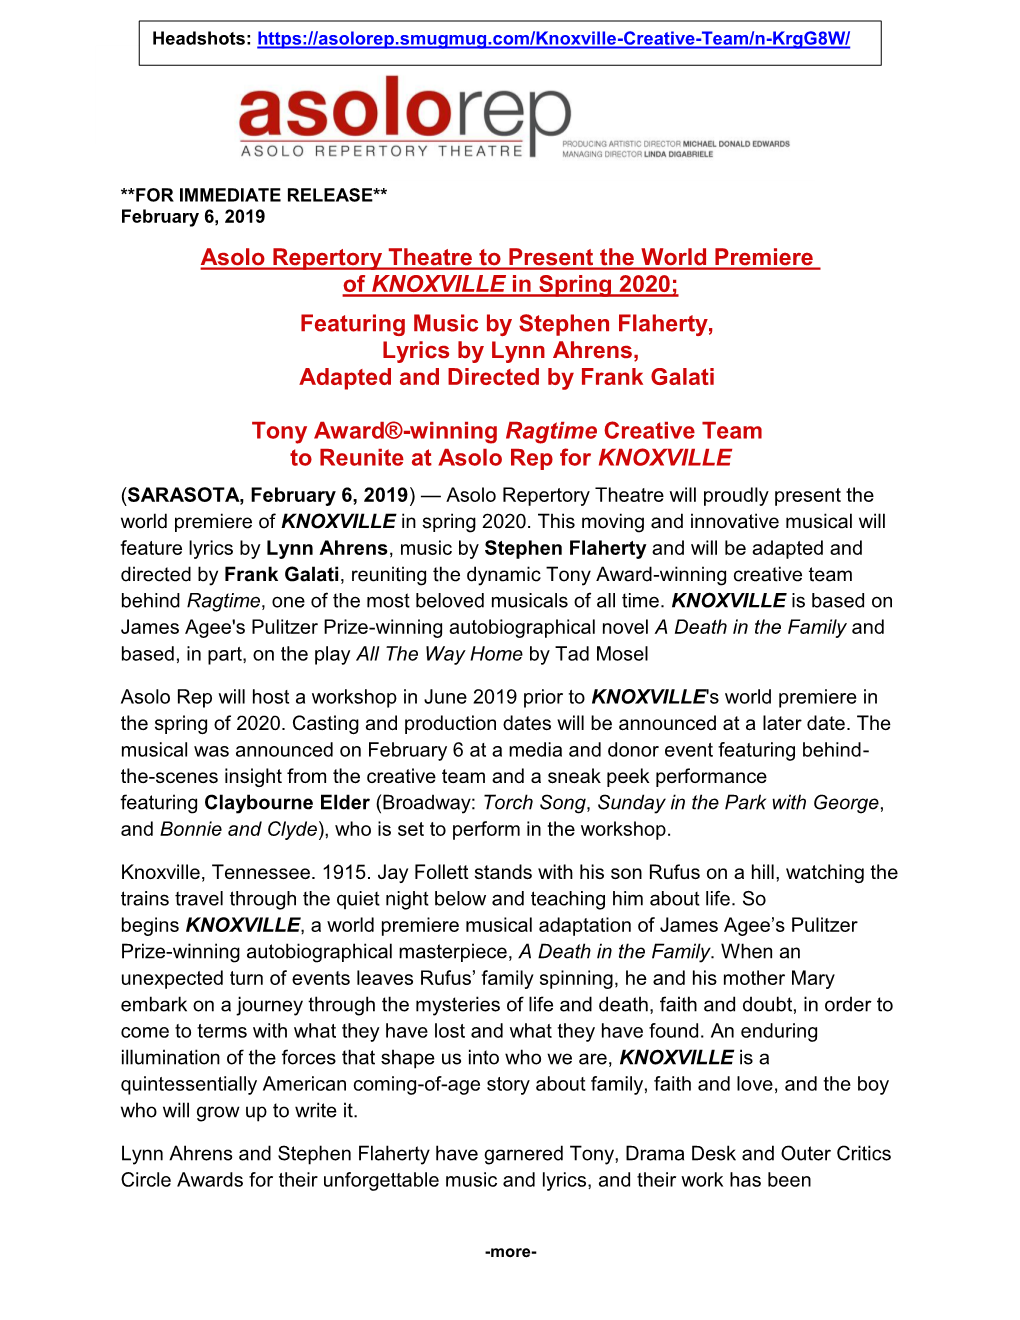 Press Release Asolo Rep Presents the World Premiere of KNOXVILLE 2020.Pdf